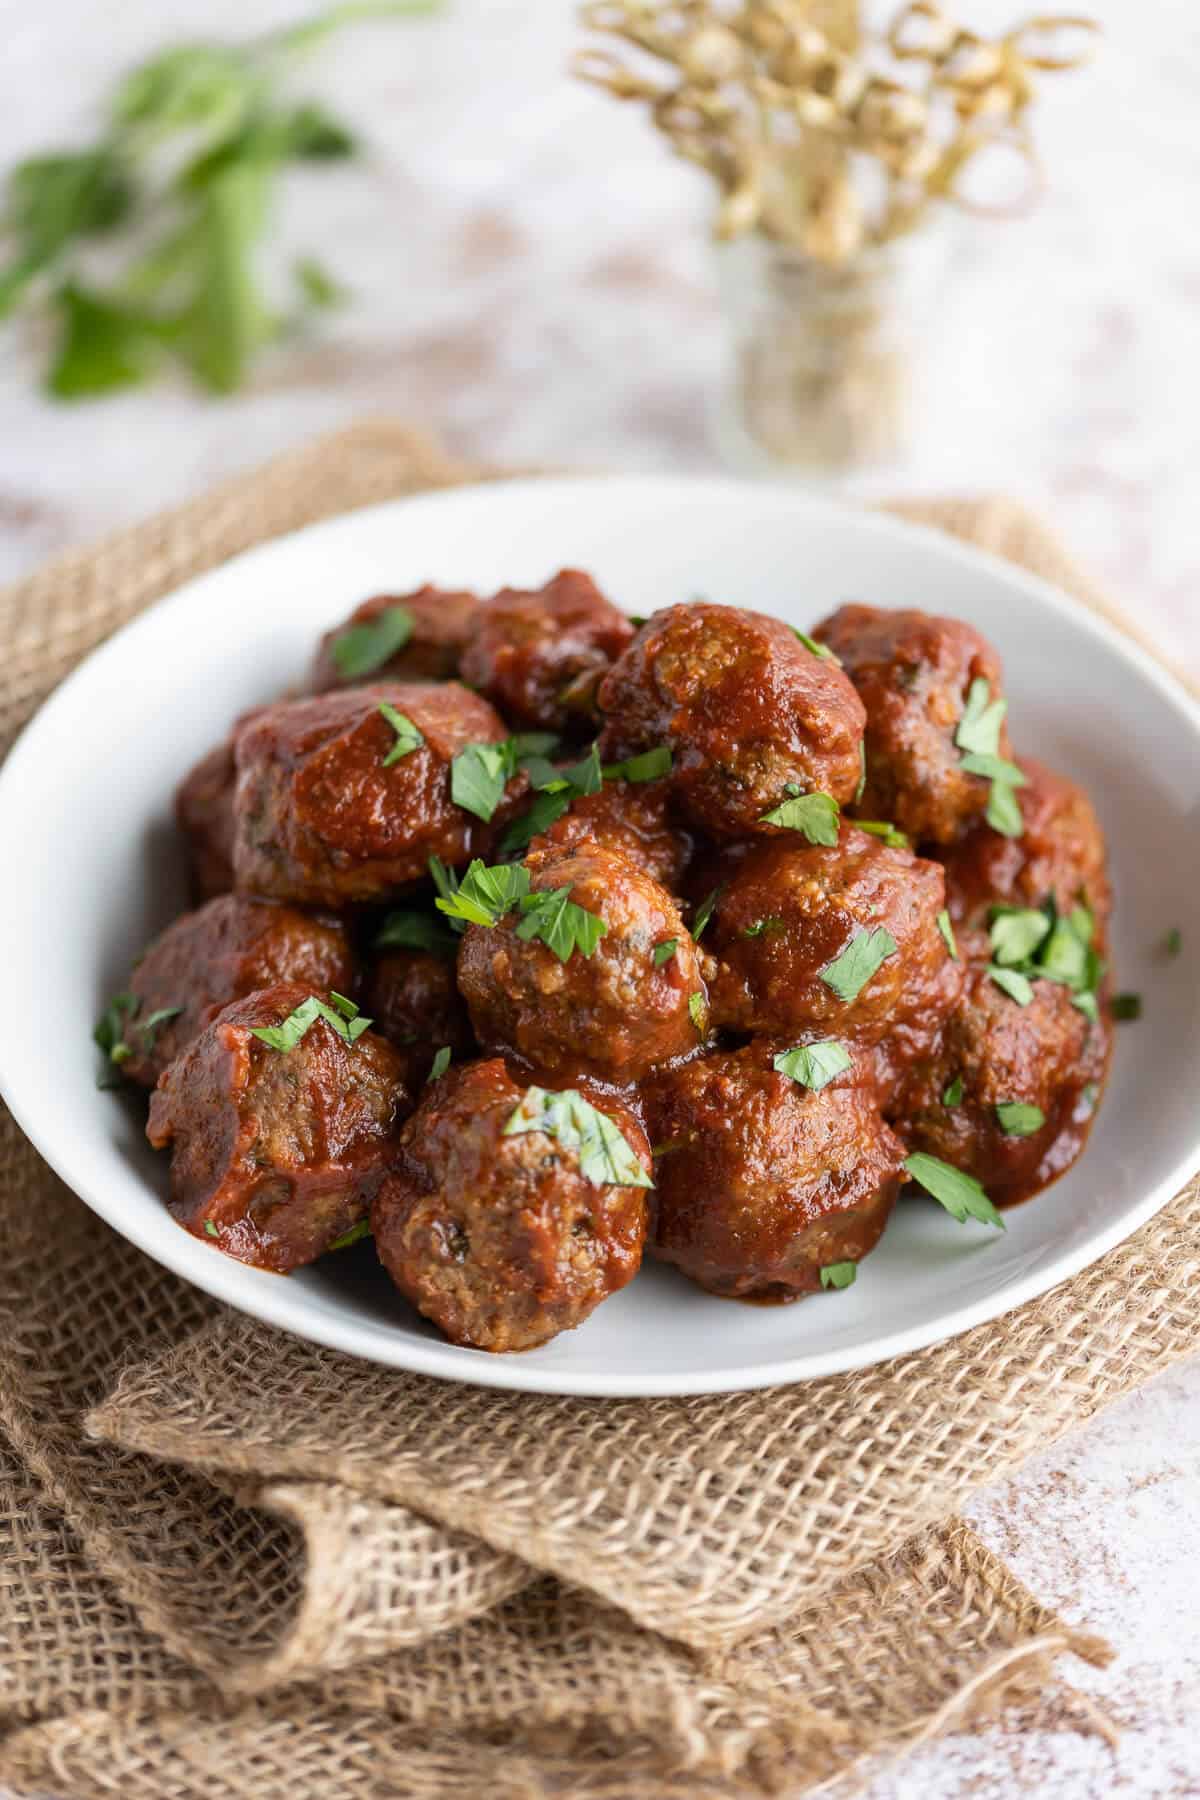 BBQ party meatballs in a white serving dish garnished with parsley, alongside toothpicks for serving.